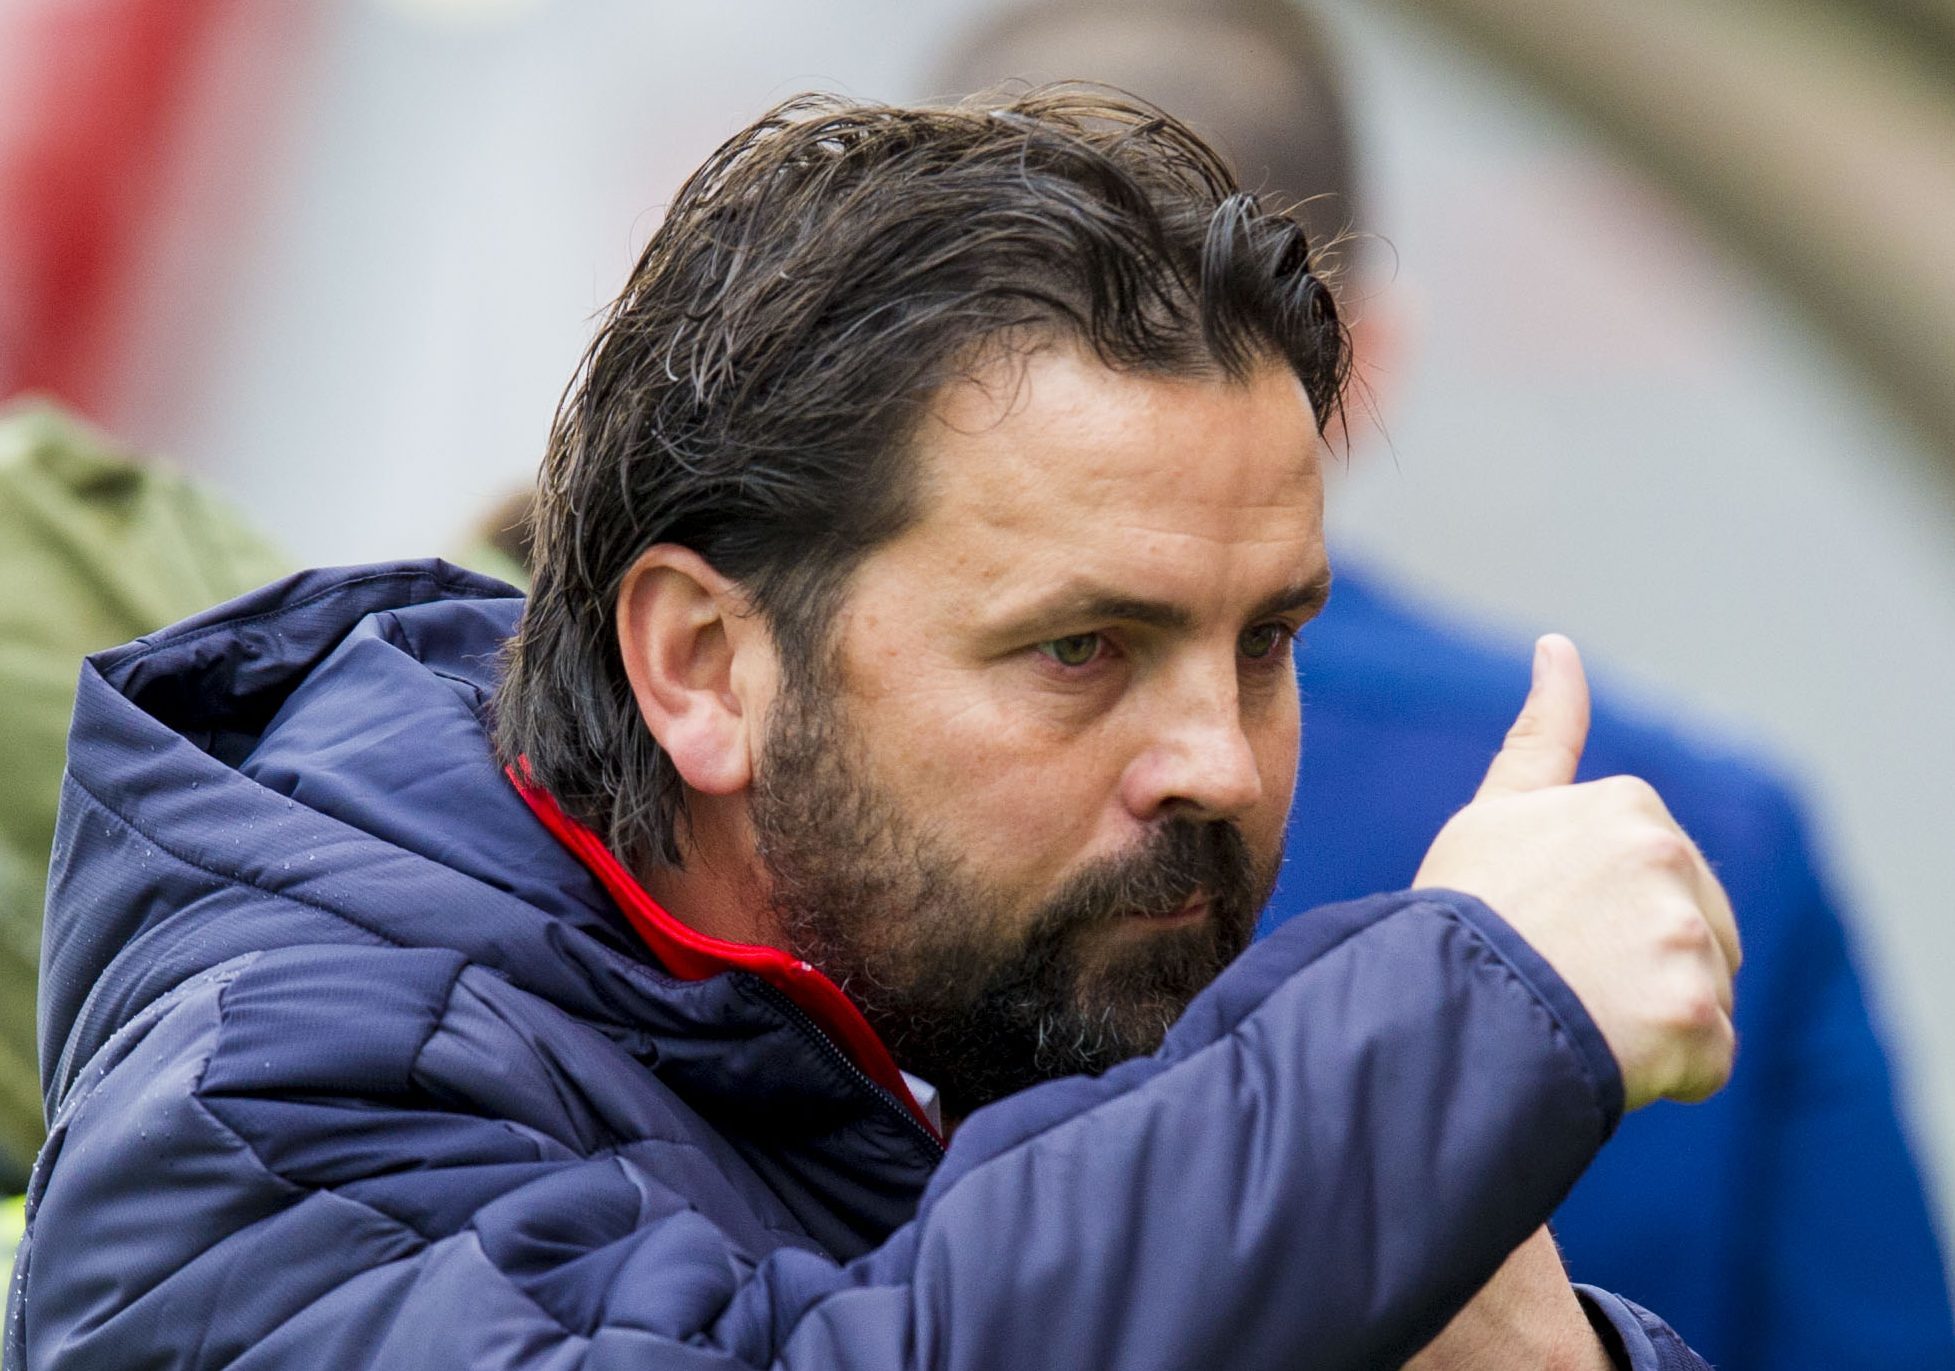 Will there be another thumbs up from Paul Hartley on Saturday?